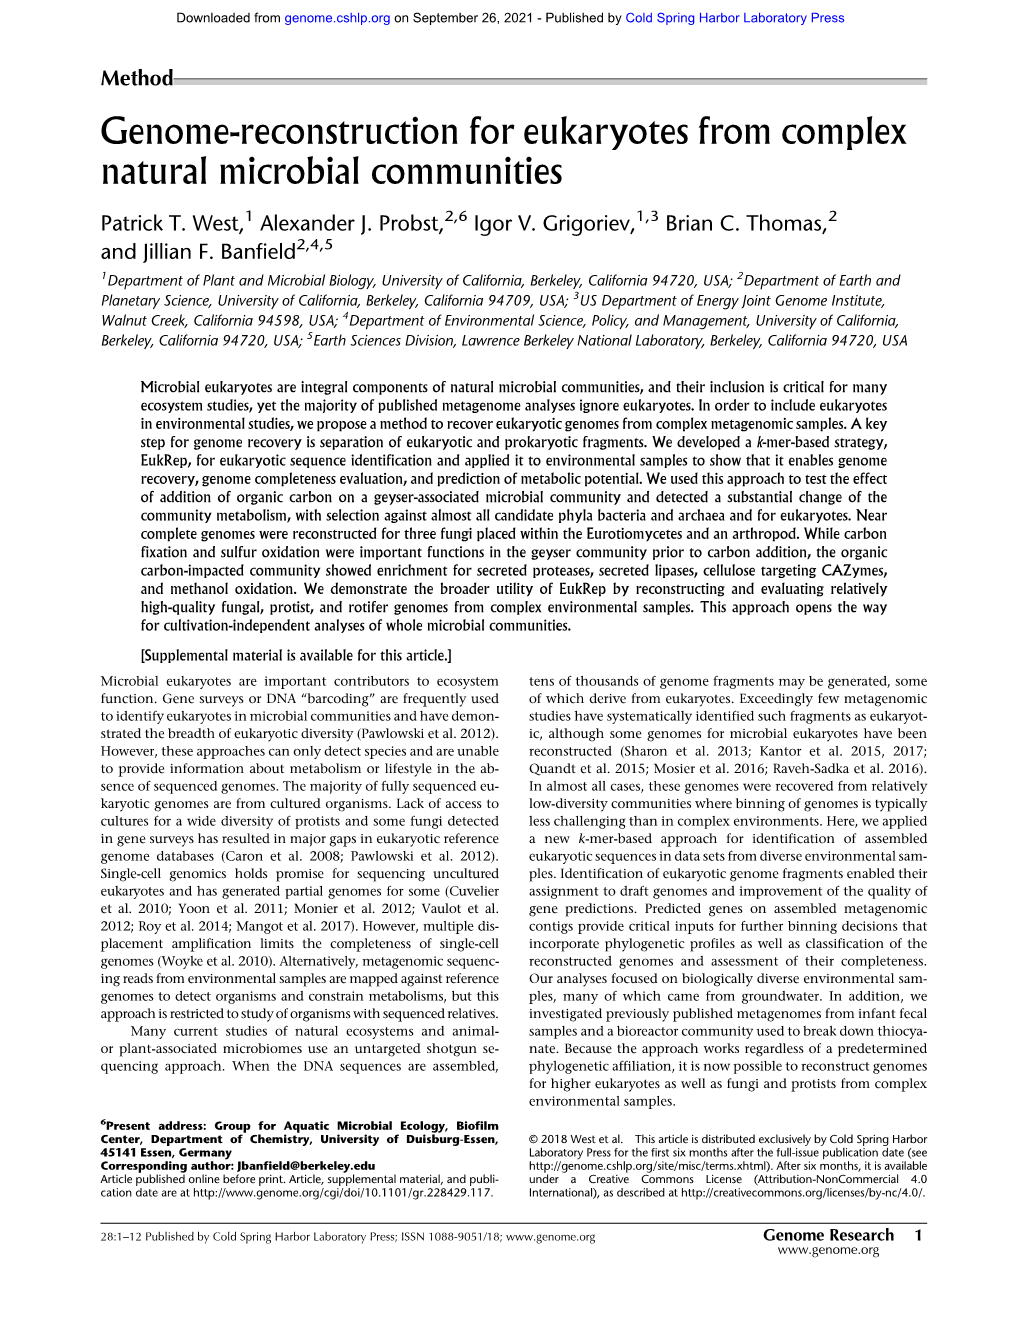 Genome-Reconstruction for Eukaryotes from Complex Natural Microbial Communities